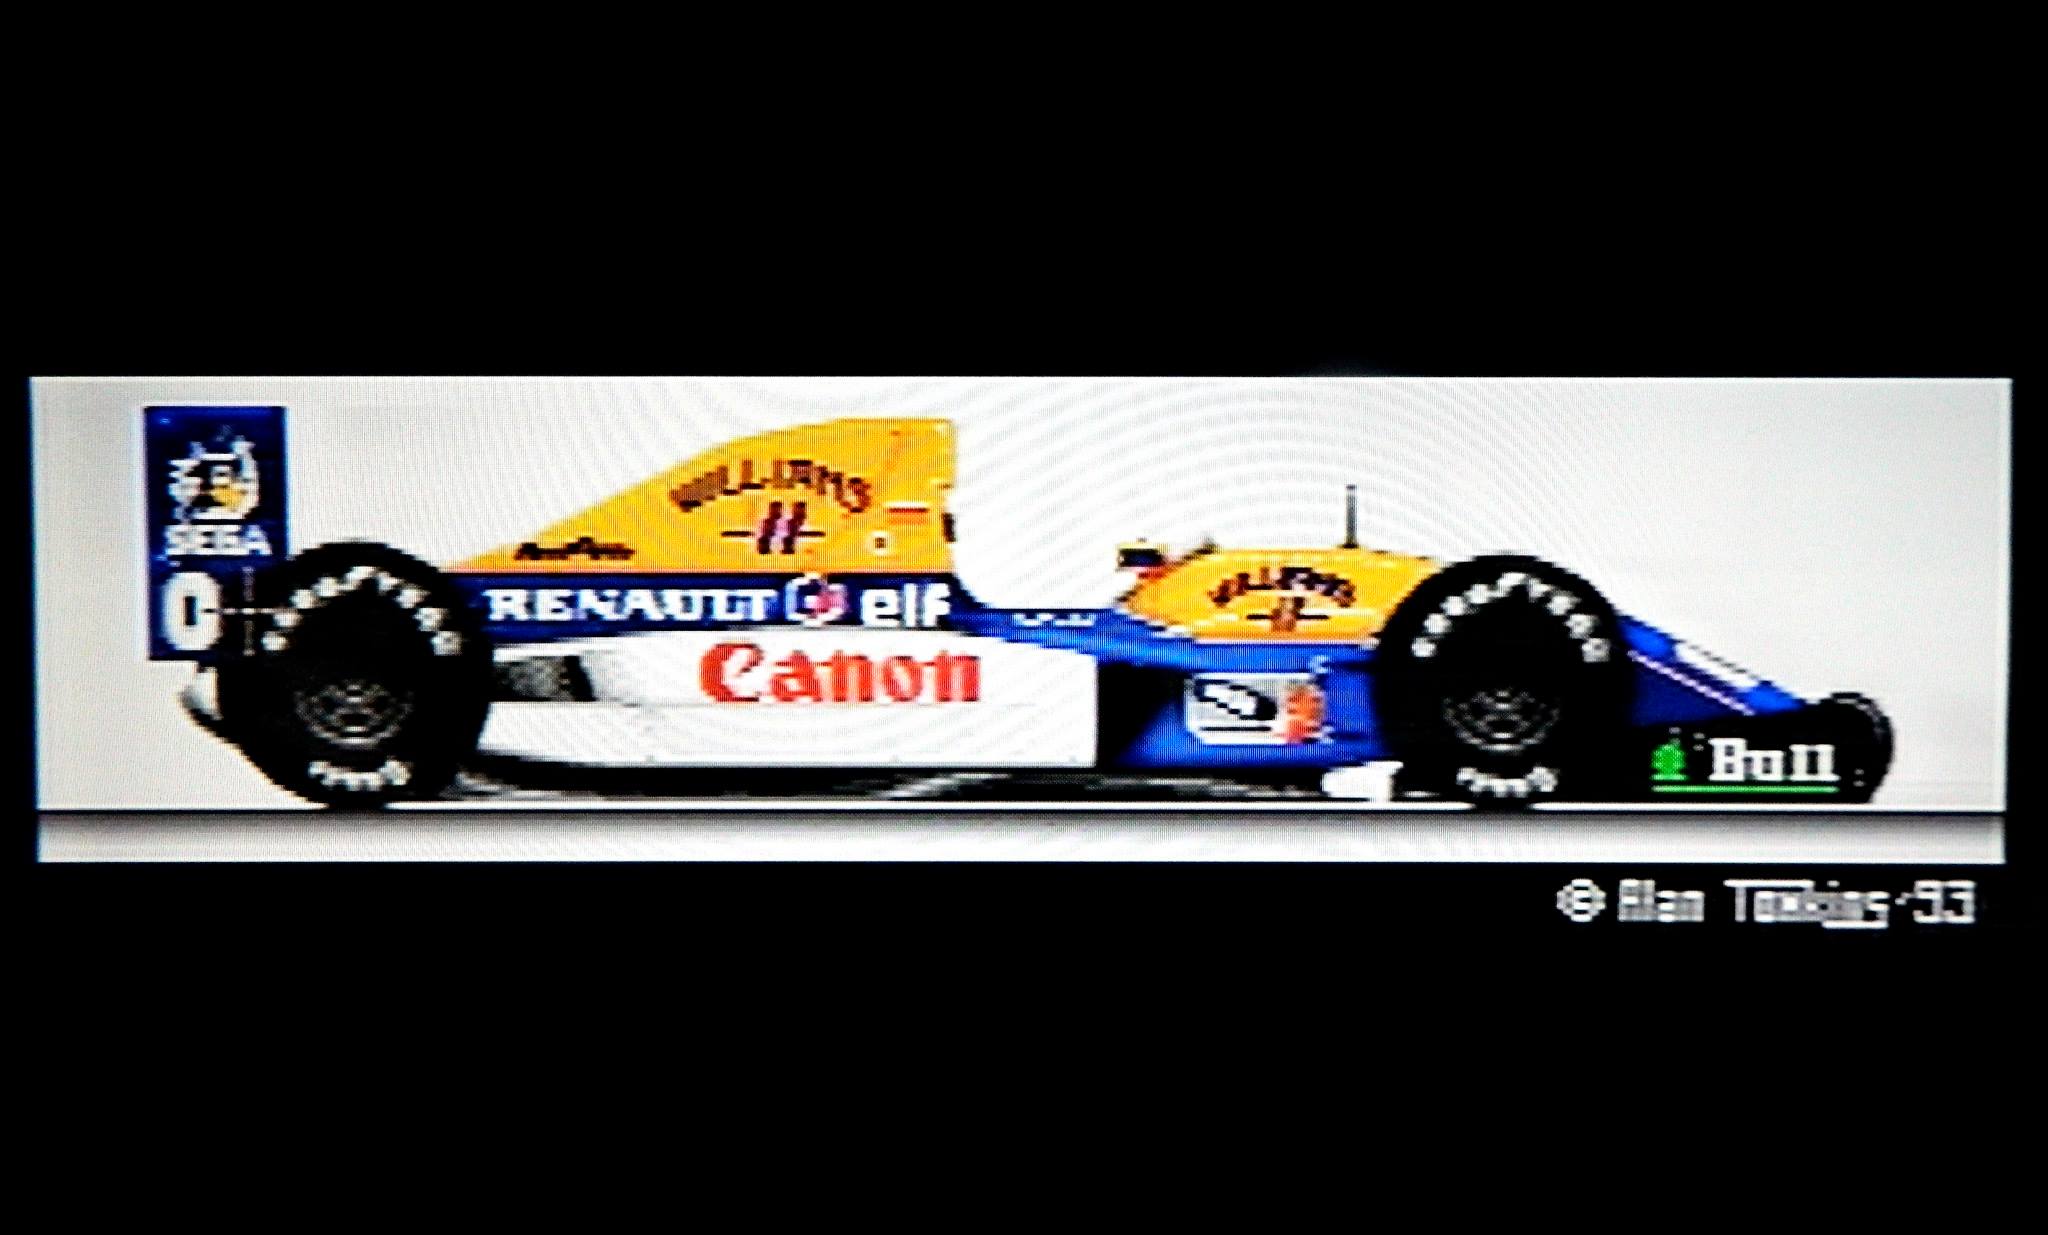 The Williams F1 car of 1993, drawn by hand for the Marlboro GP game. This game was part of Marlboro's Grand Prix promotion.